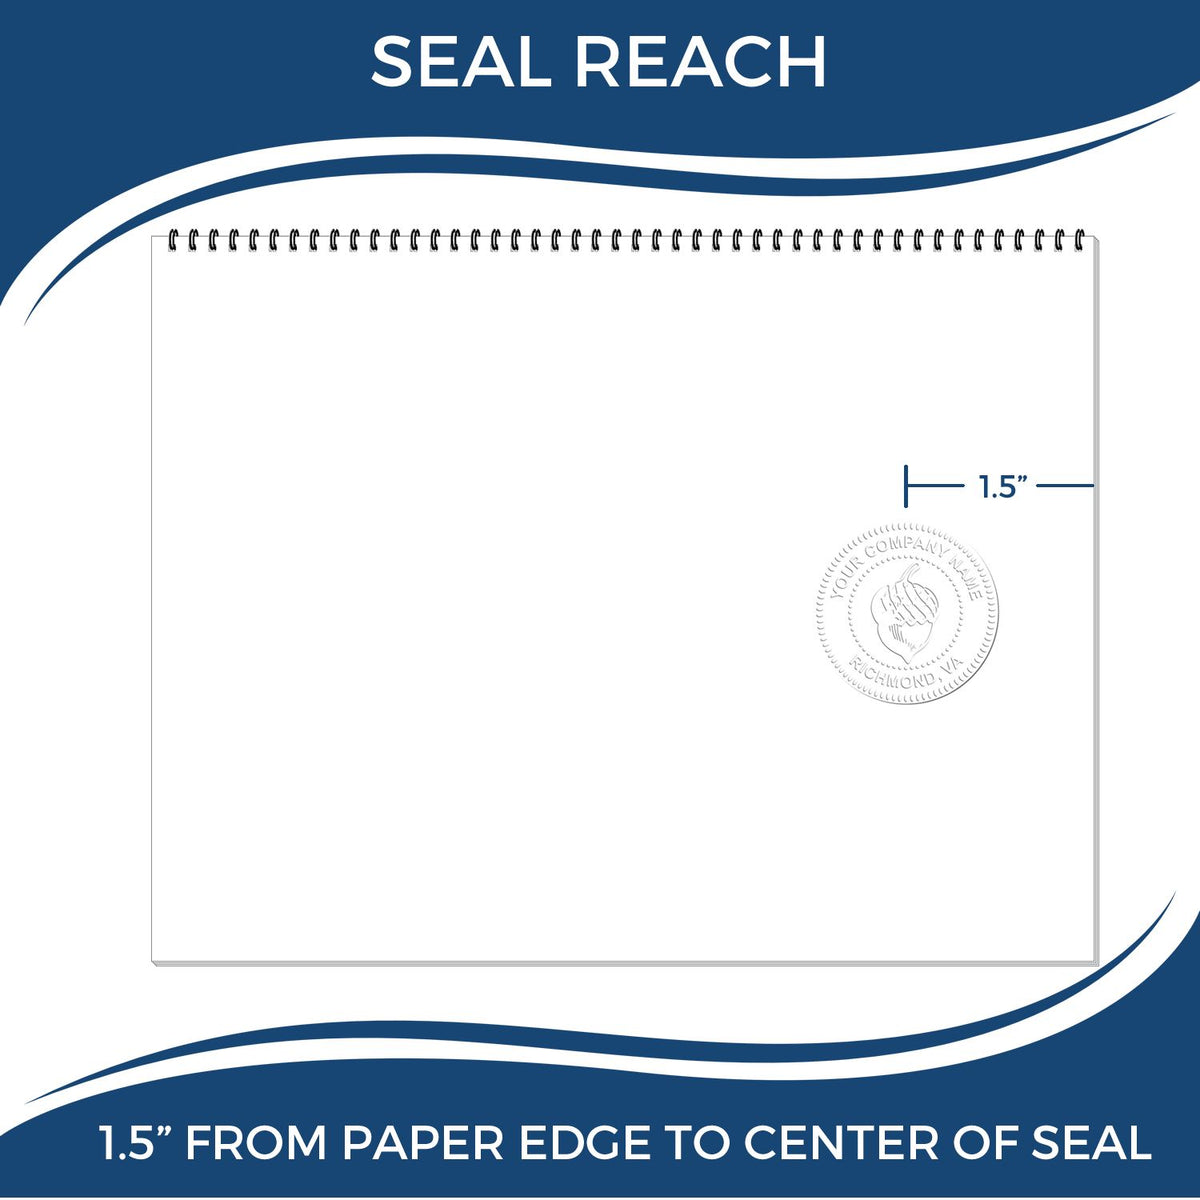 An infographic showing the seal reach which is represented by a ruler and a miniature seal image of the Oregon Geologist Desk Seal